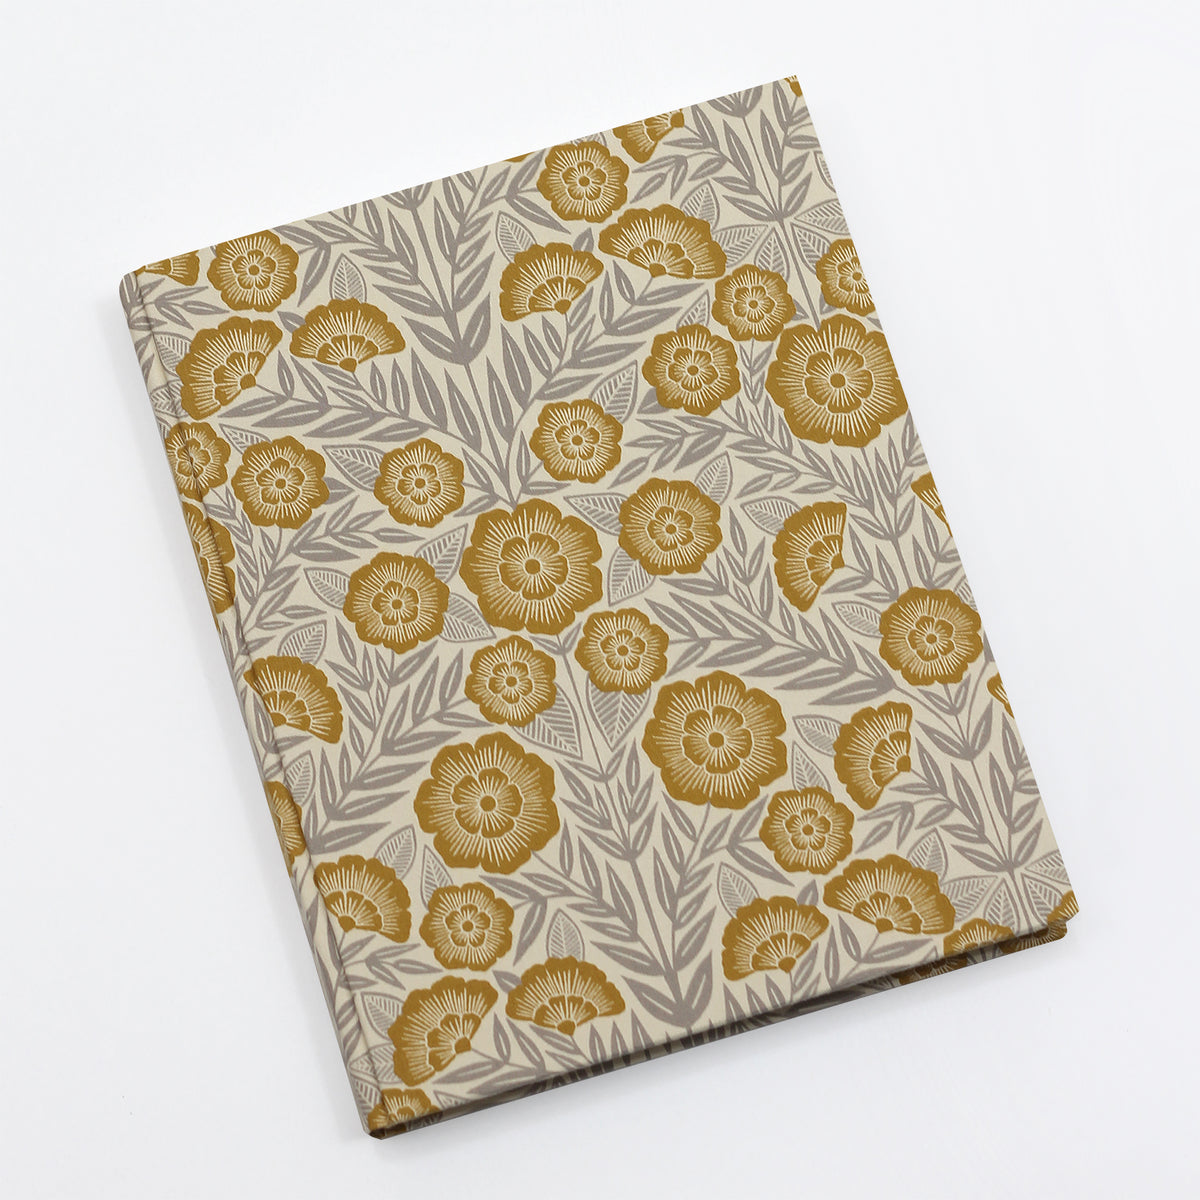 Large 8 x 10 Blank Page Journal | Limited Edition Cover: Ecru Floral